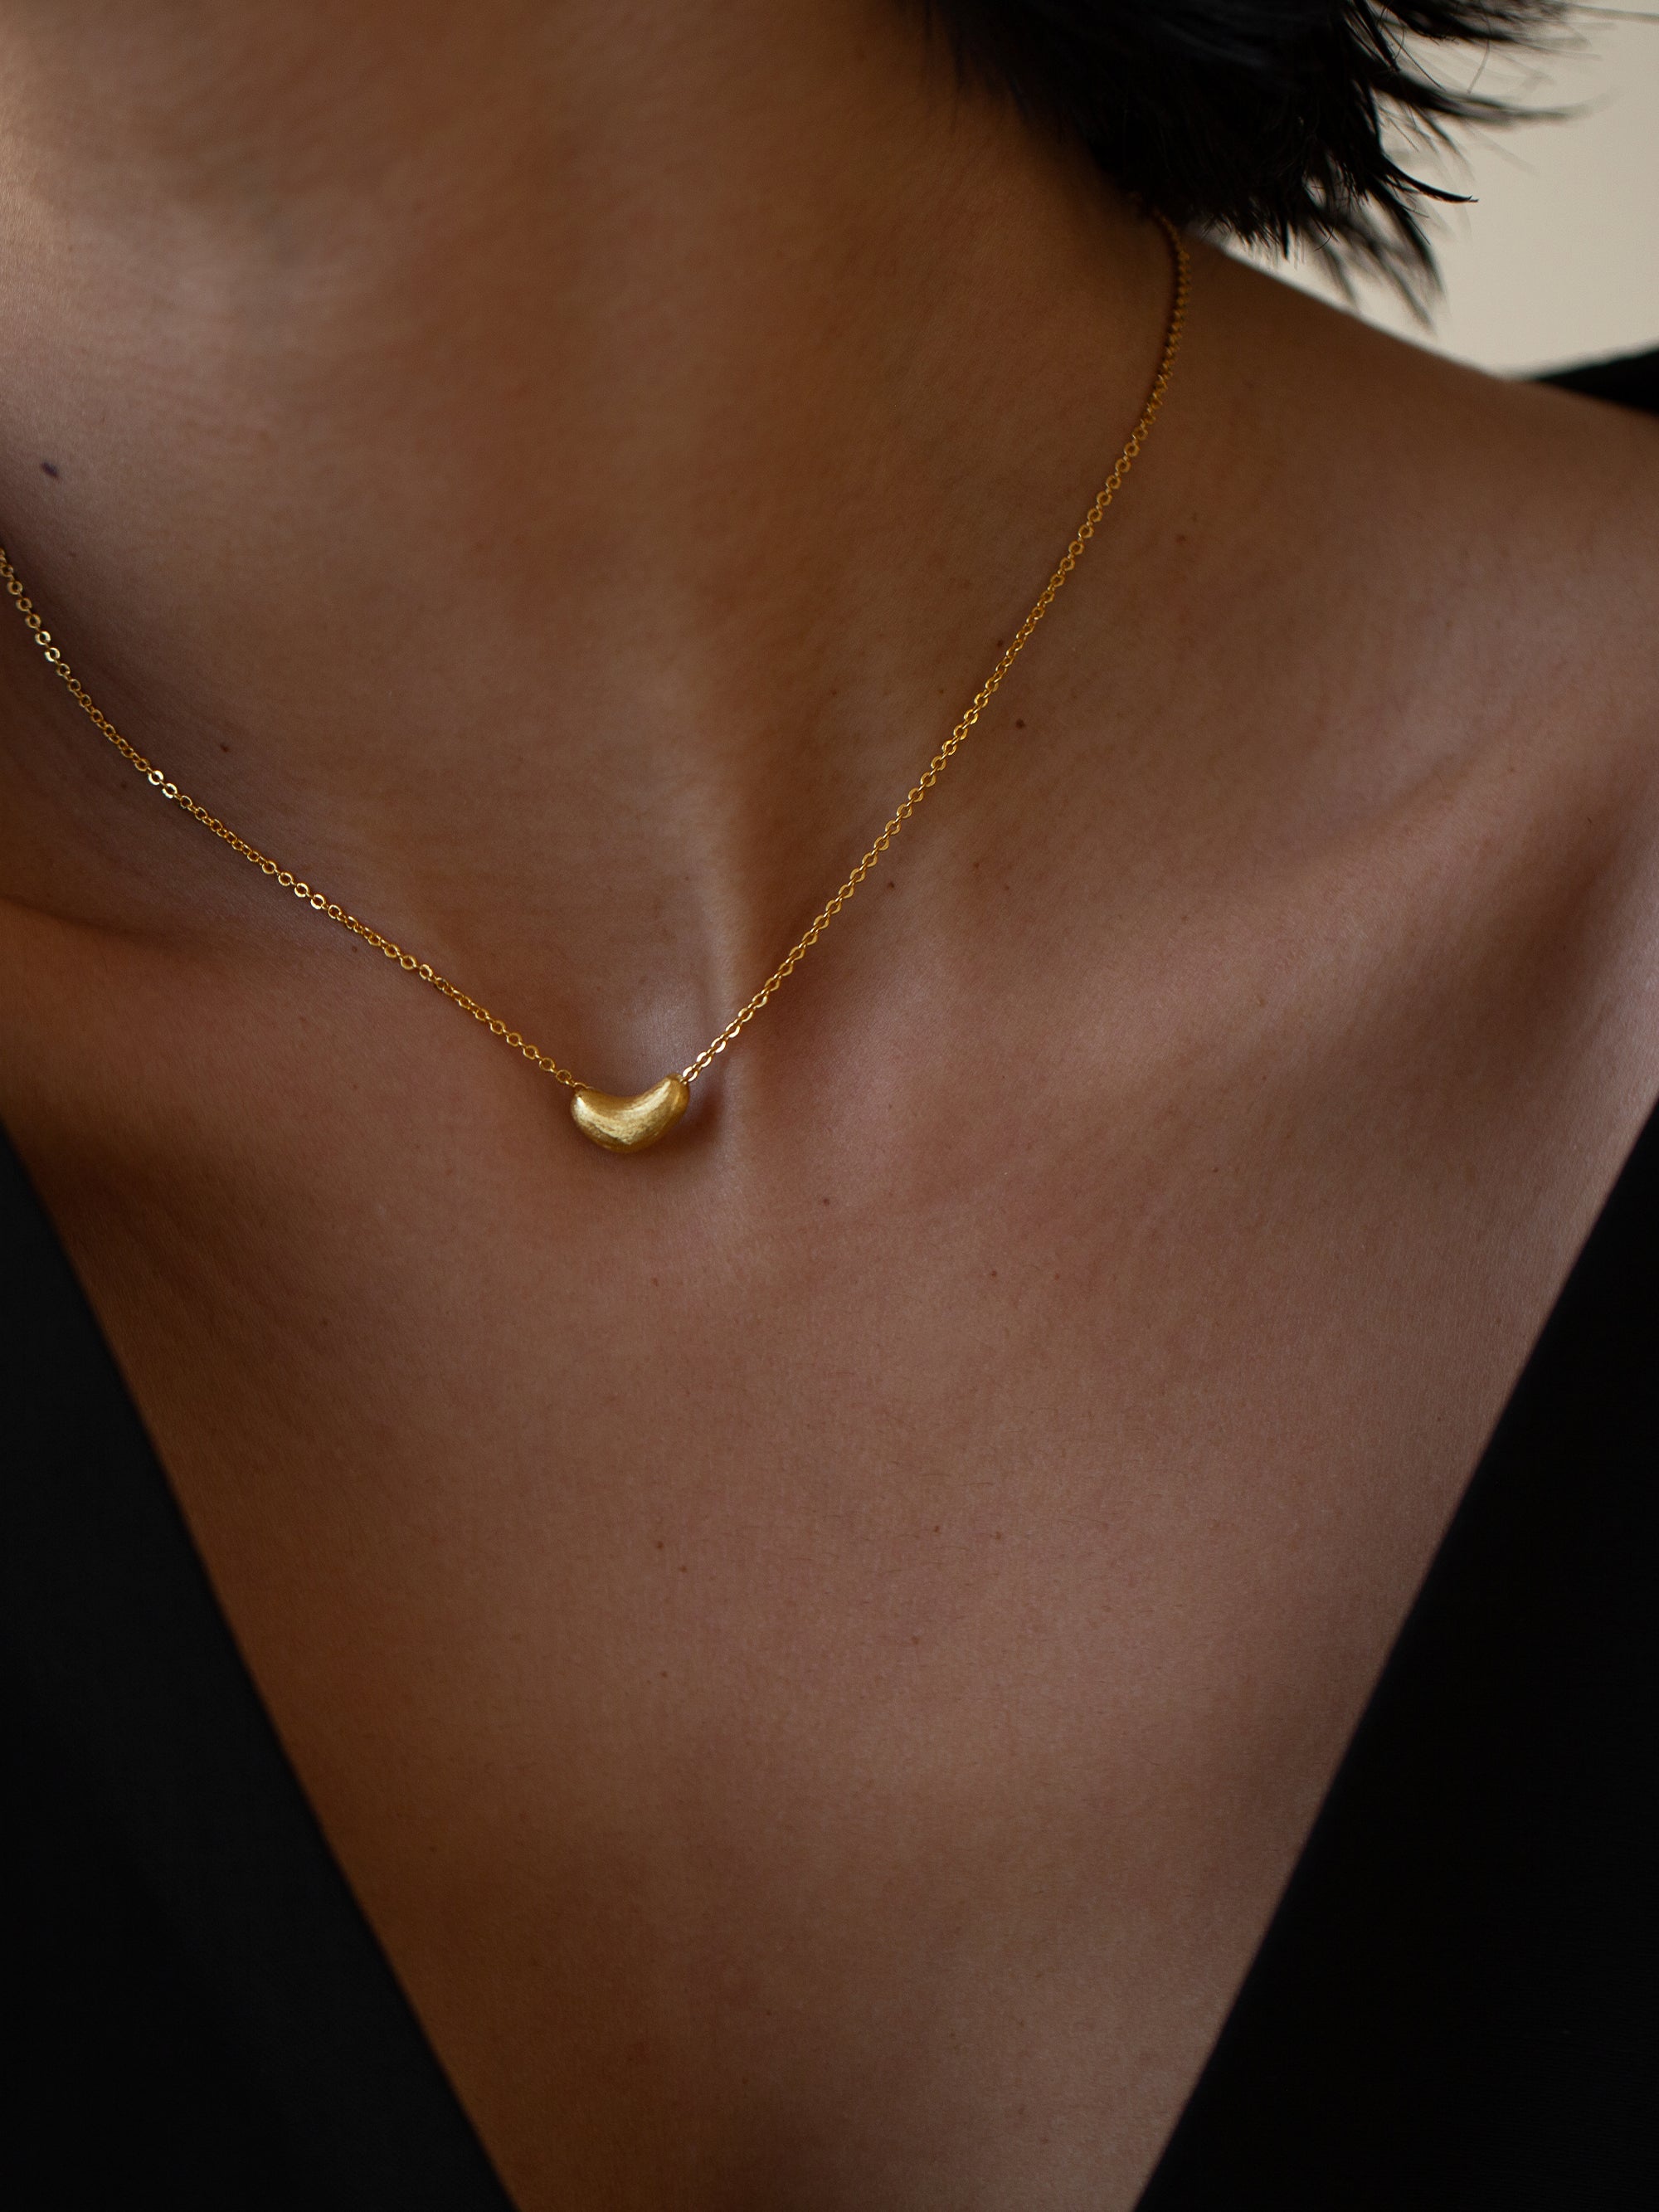 Brushed Bean Necklace 18k gold plated brass 